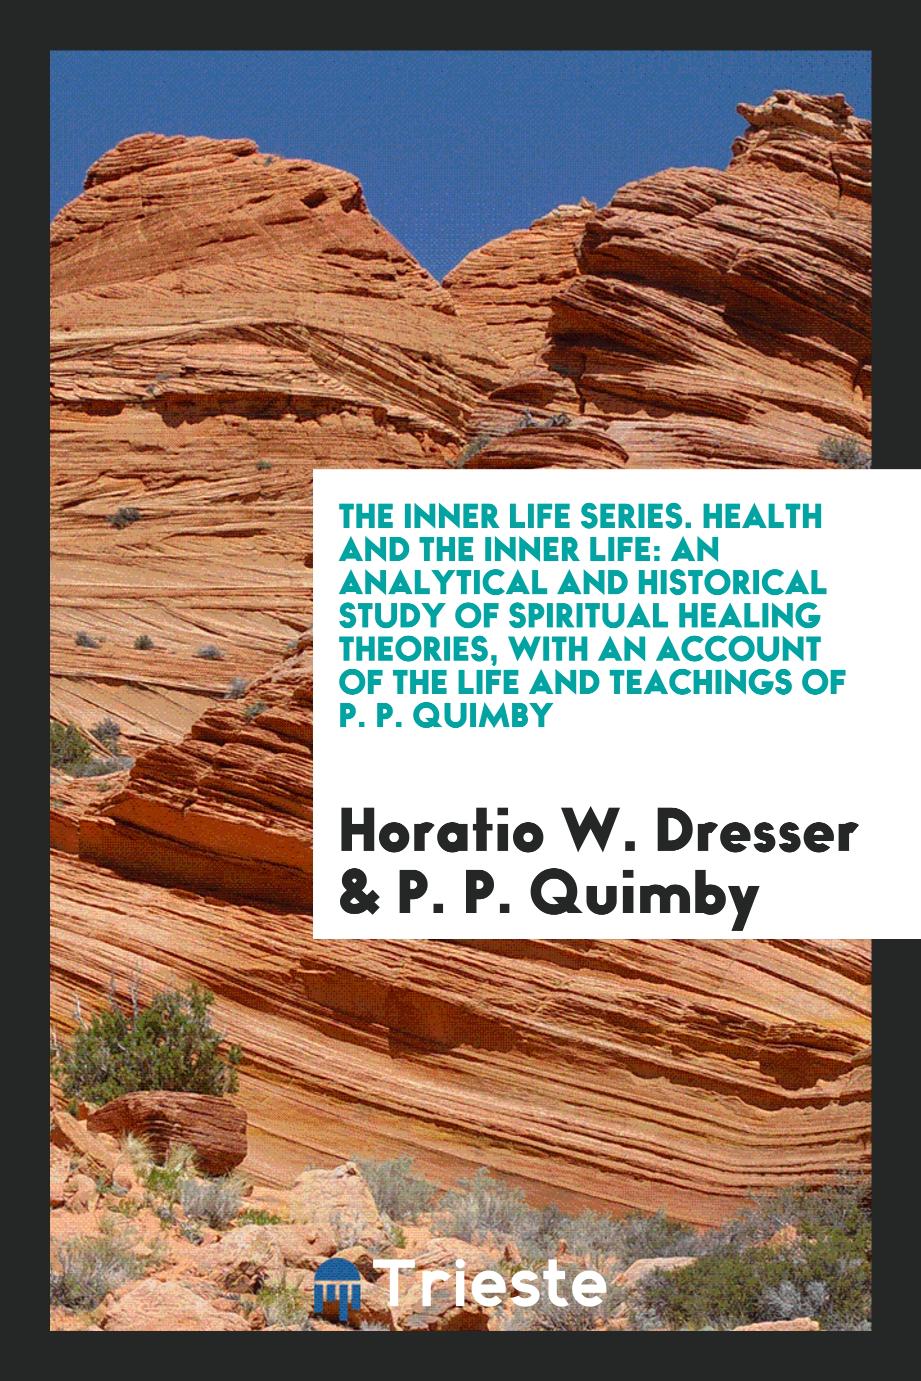 The Inner Life Series. Health and the Inner Life: An Analytical and Historical Study of Spiritual Healing Theories, with an Account of the Life and Teachings of P. P. Quimby